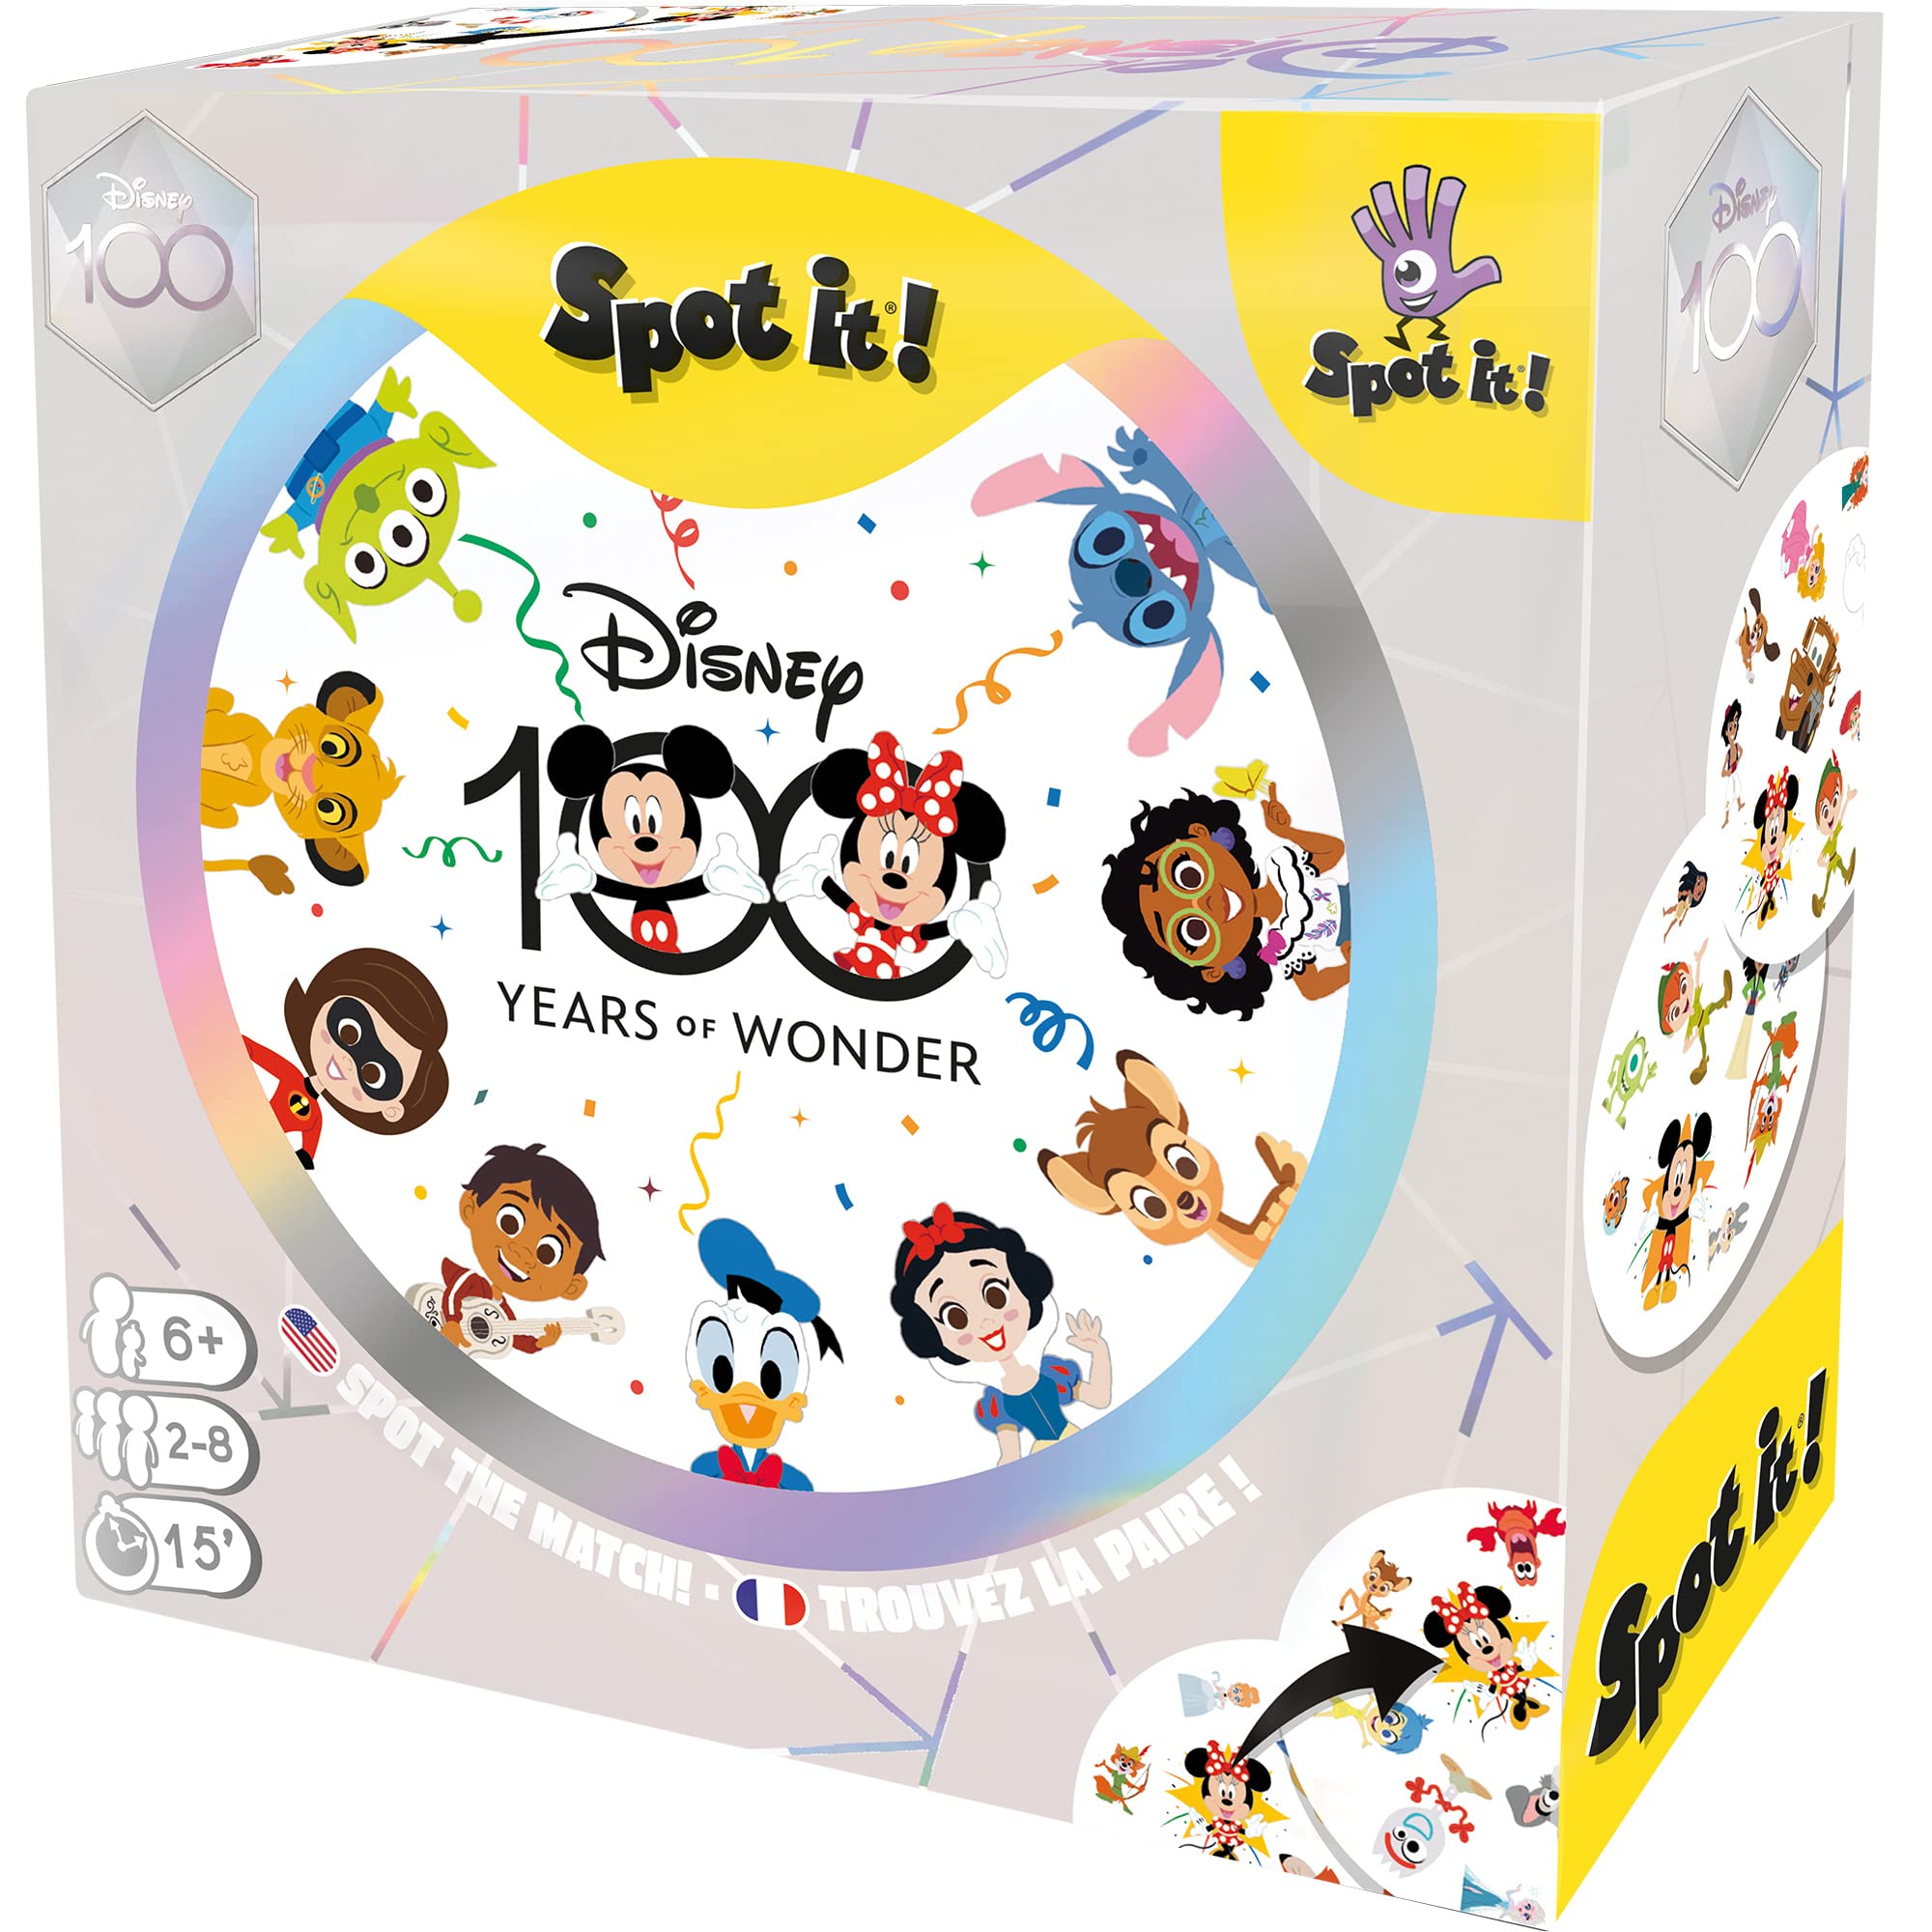 Spot It! Disney 100 Years of Wonder Card Game | Fast-Paced Symbol Matching Observation Game | Fun Family Game for Kids and Adults | Age 6+ | 2-8 Players | Avg. Playtime 15 Minutes | Made by Zygomatic